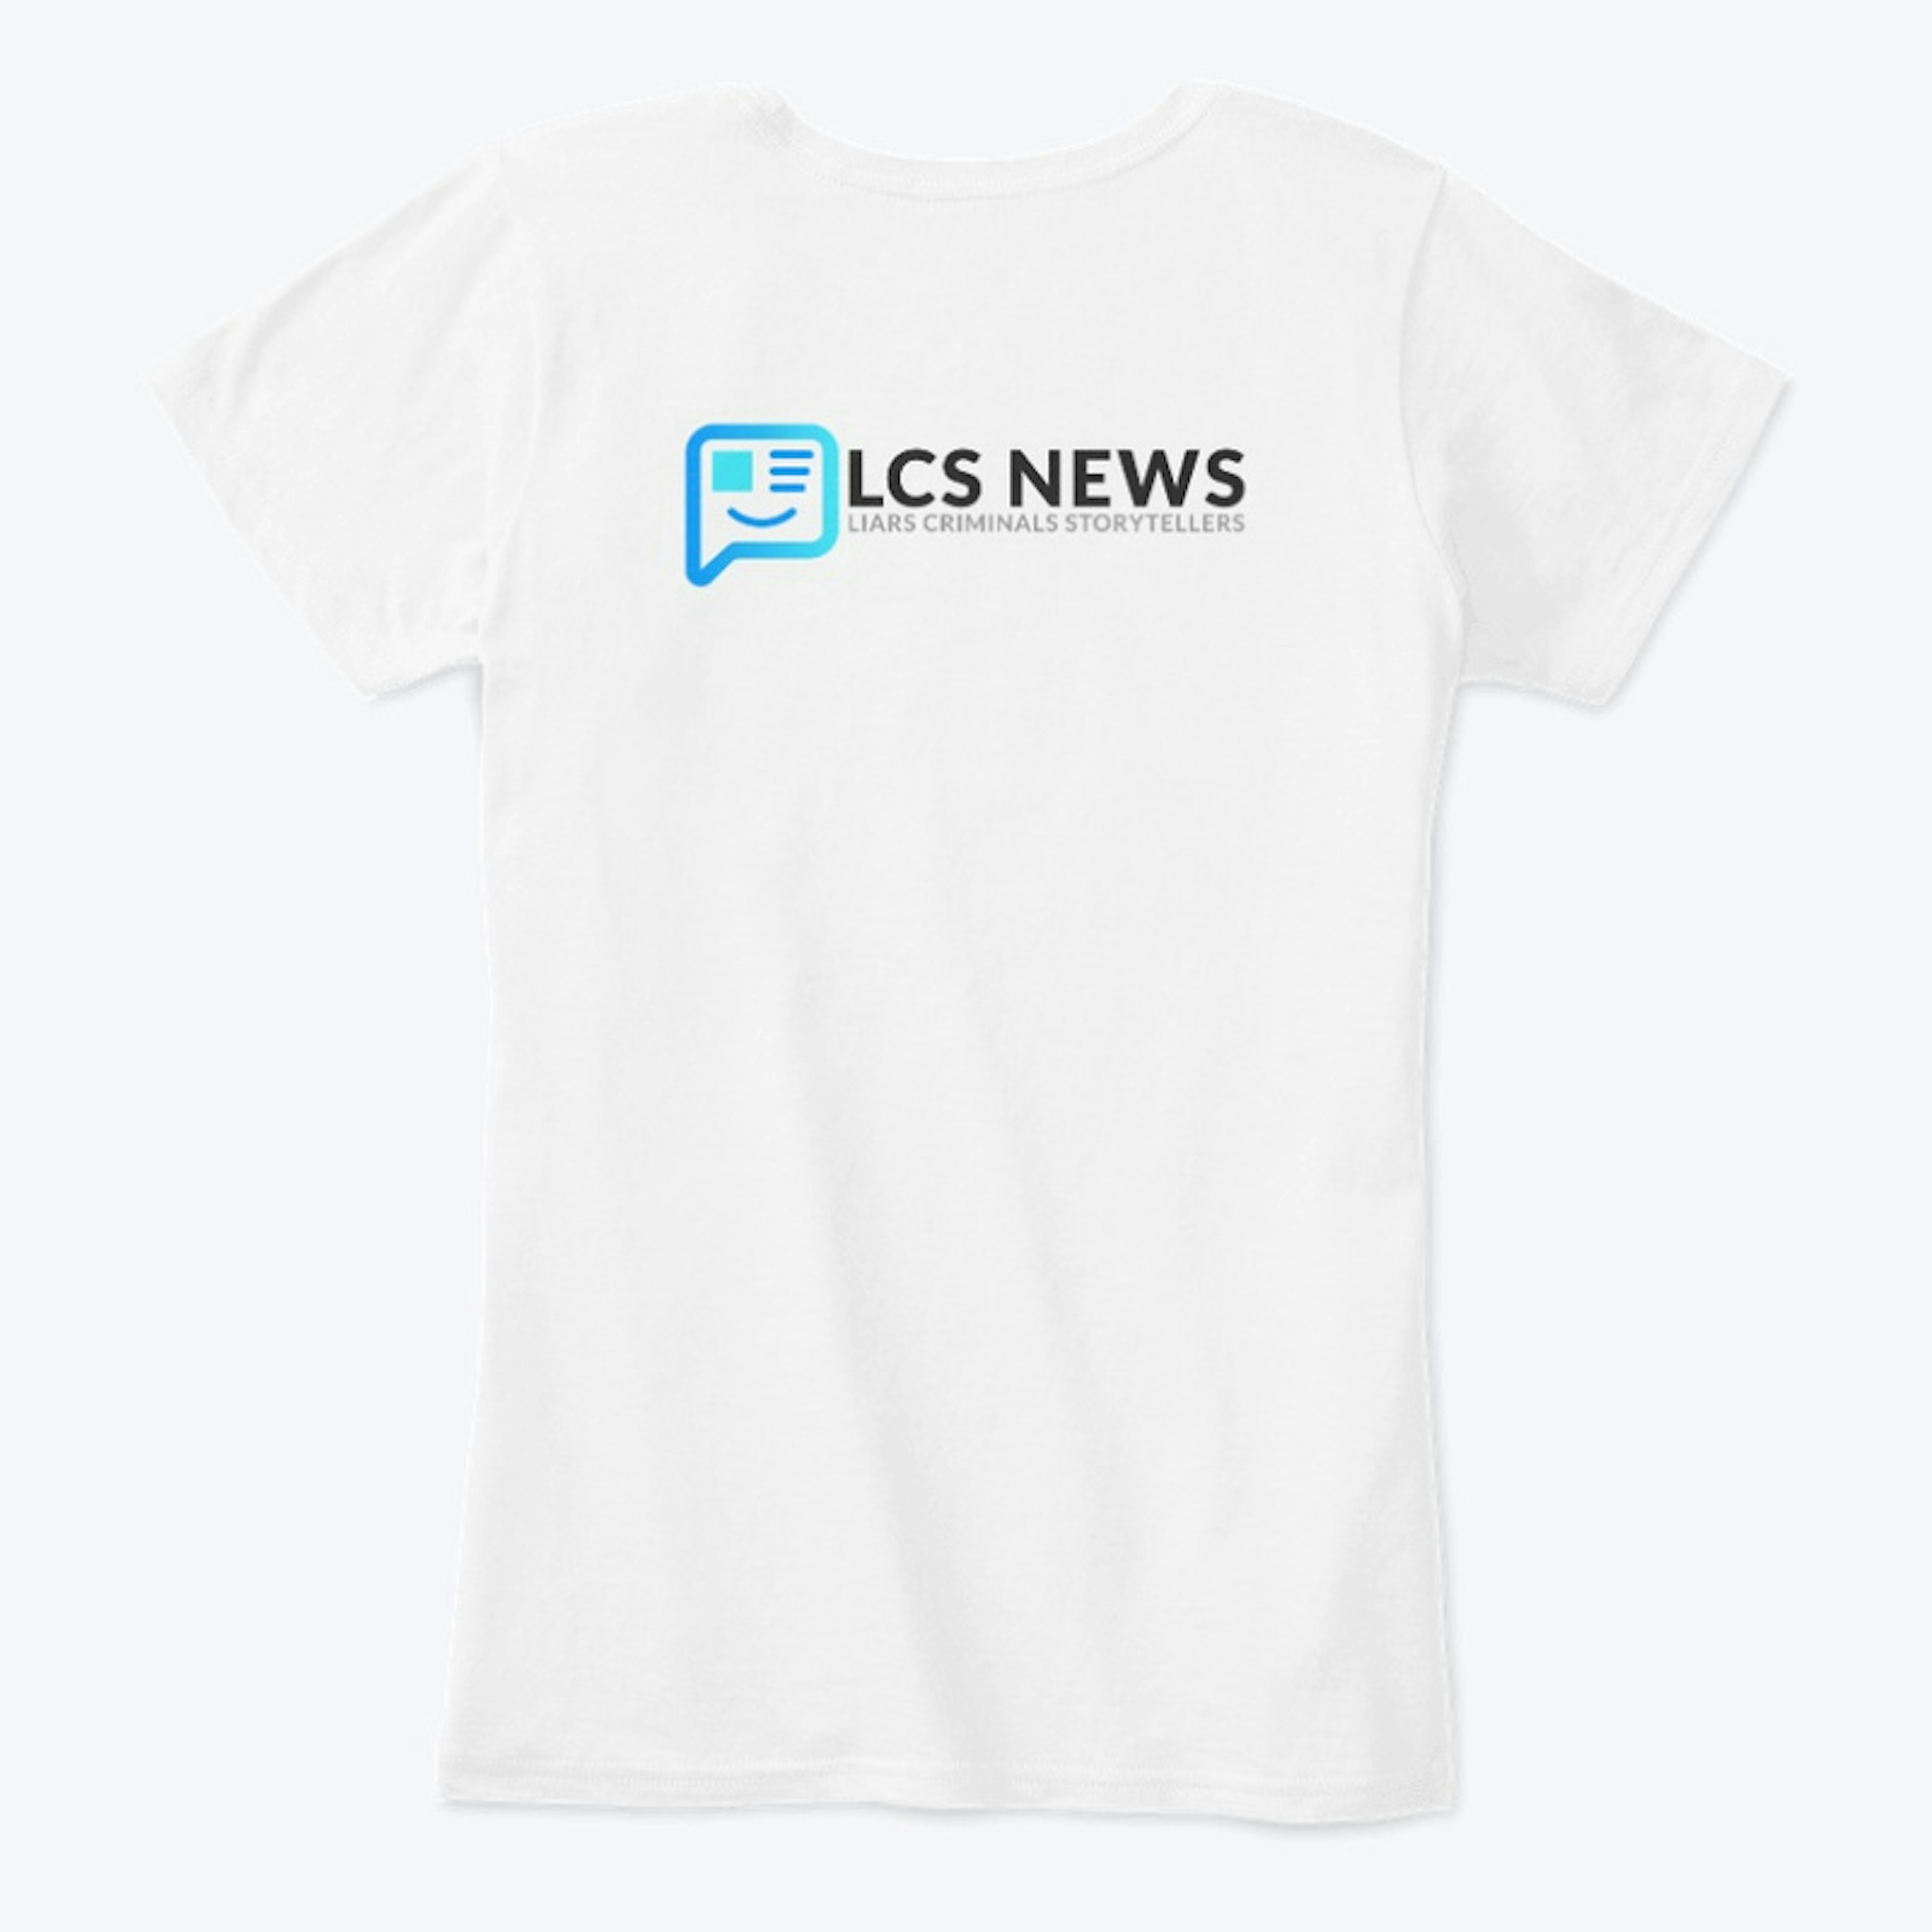 Support LCS News